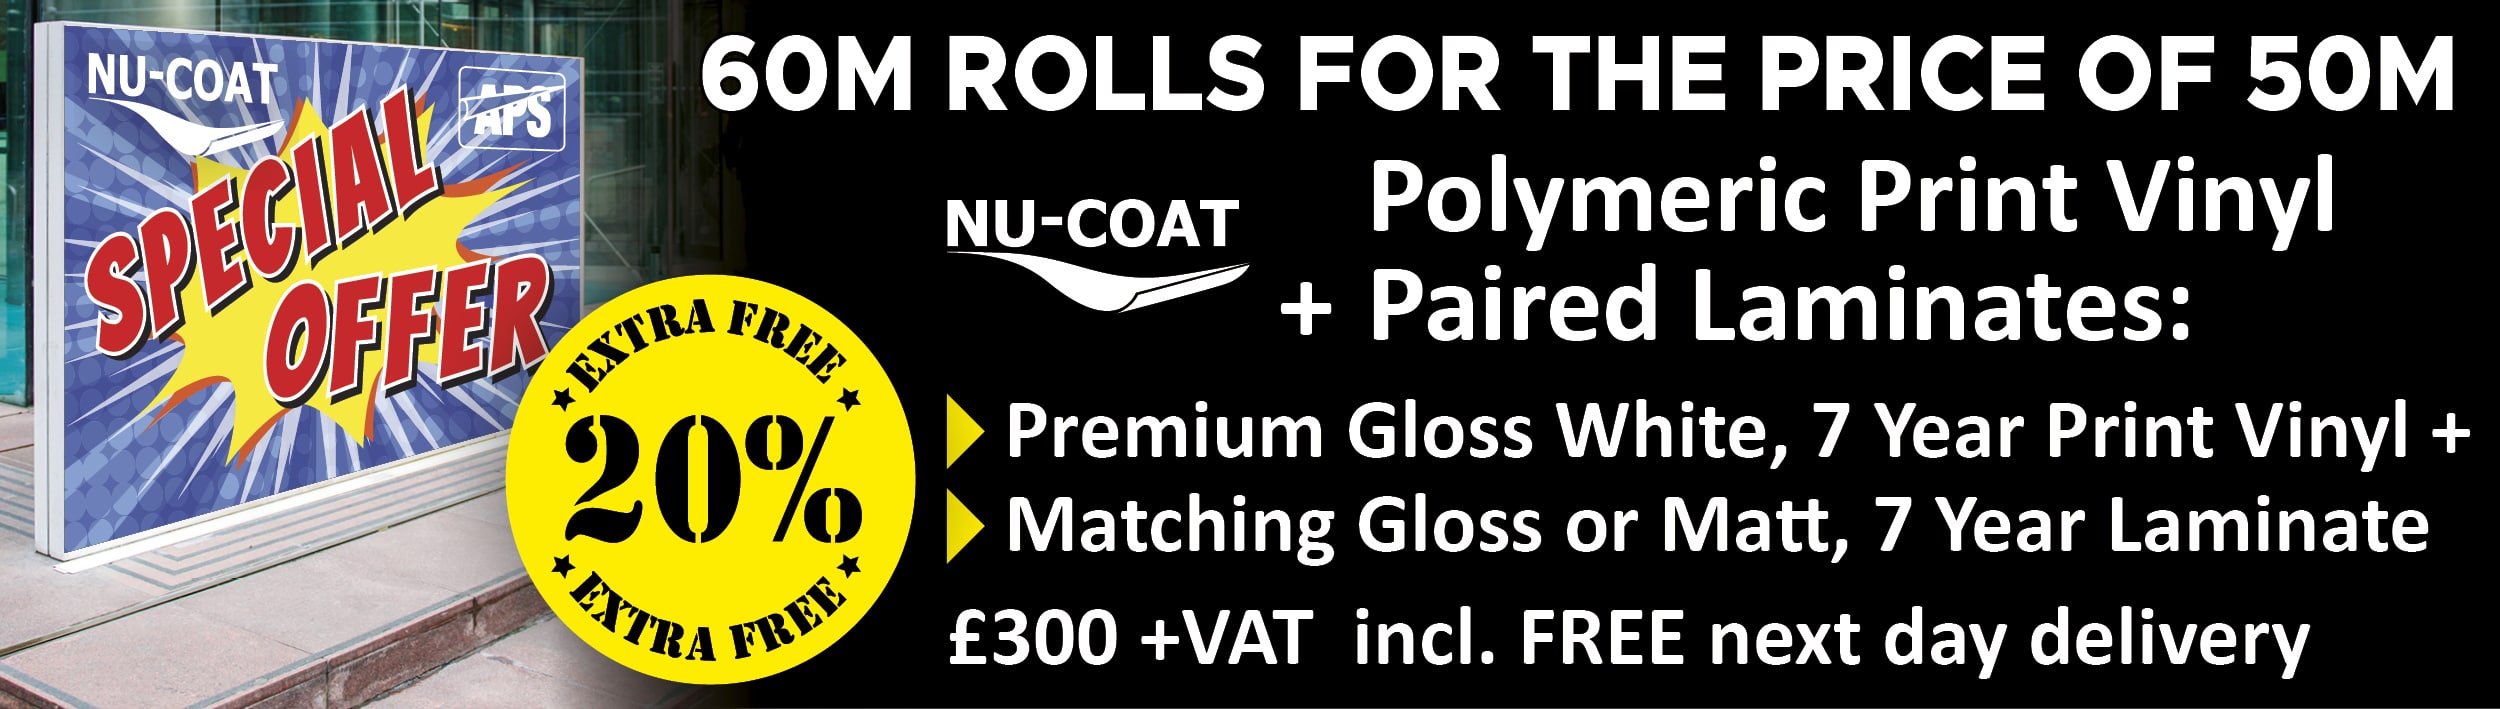 NU-COAT 20% EXTRA MATERIAL FREE bundle deal - Polymeric premium print vinyl PLUS gloss or matt clear laminate only £300 +VAT and includes FREE delivery!